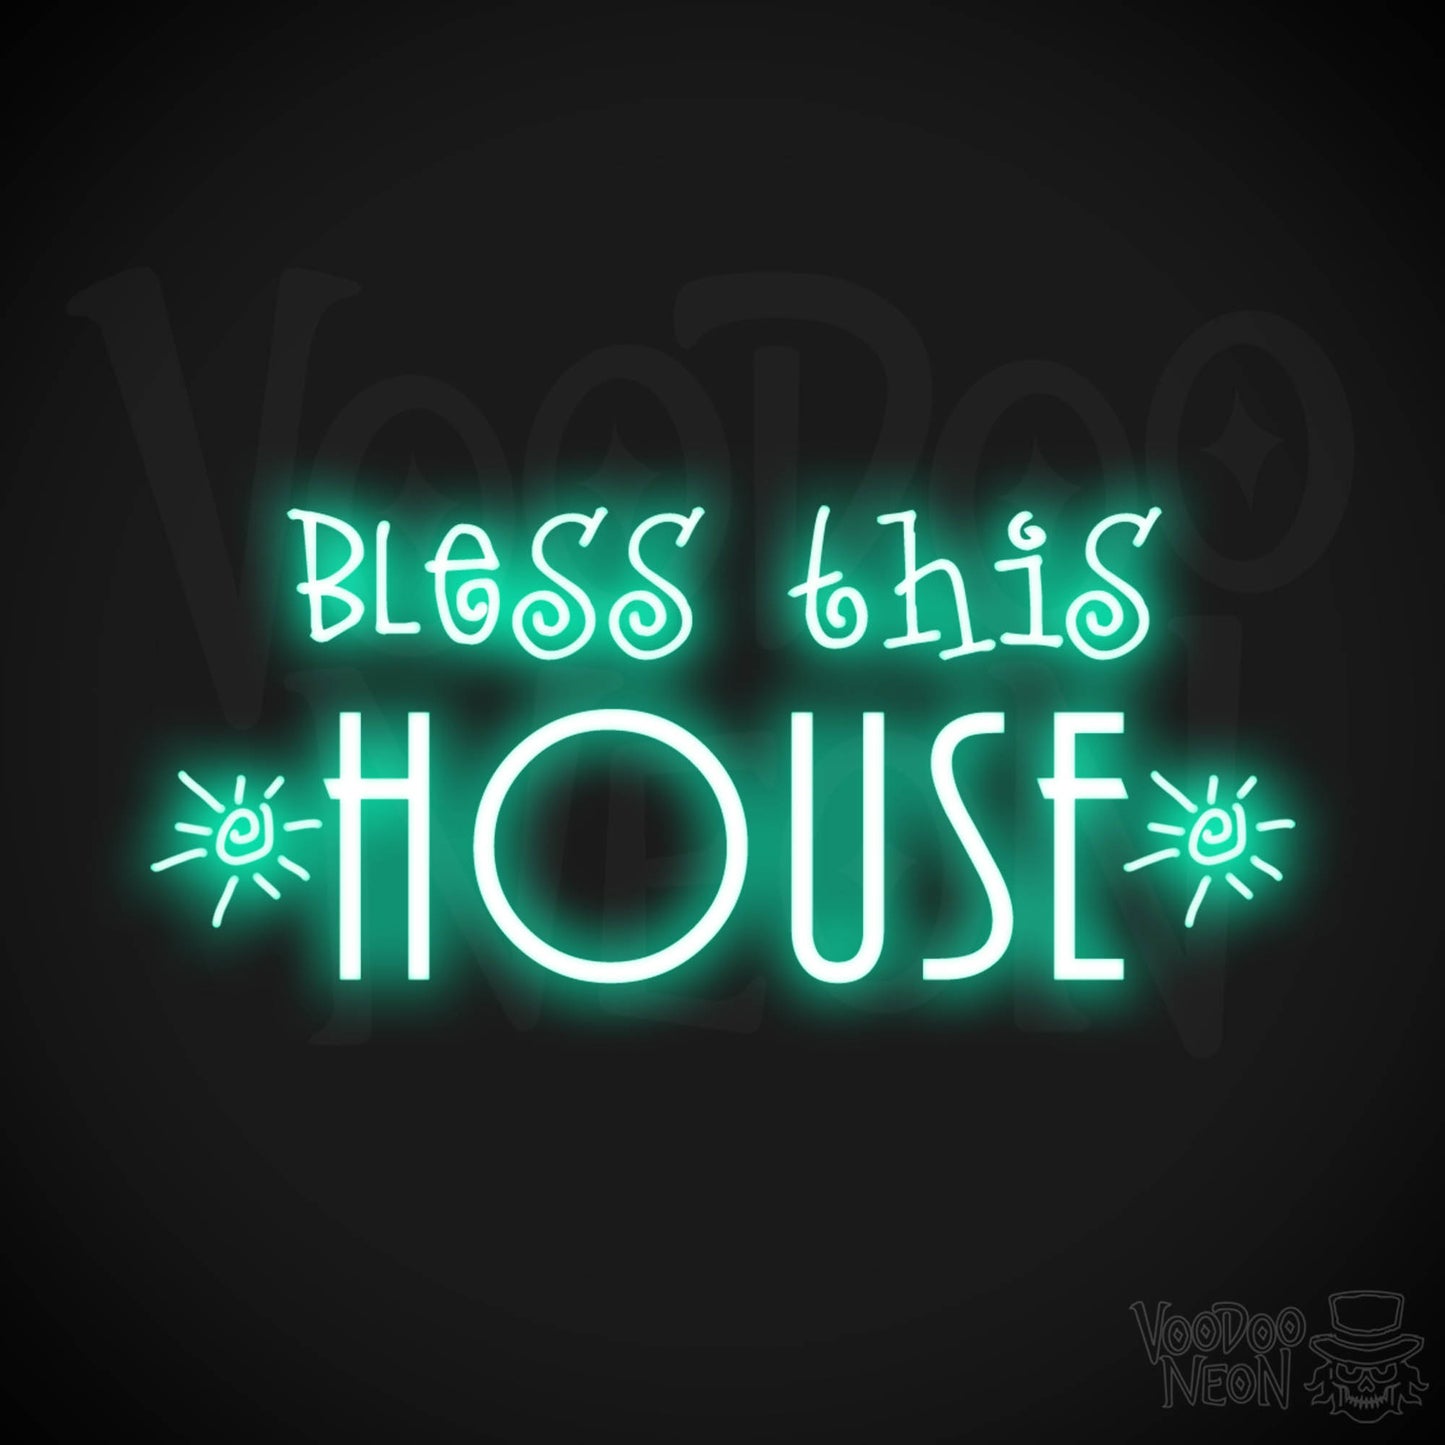 Bless This House Neon Sign - Neon Bless This House Sign - LED Light Up Sign - Color Light Green